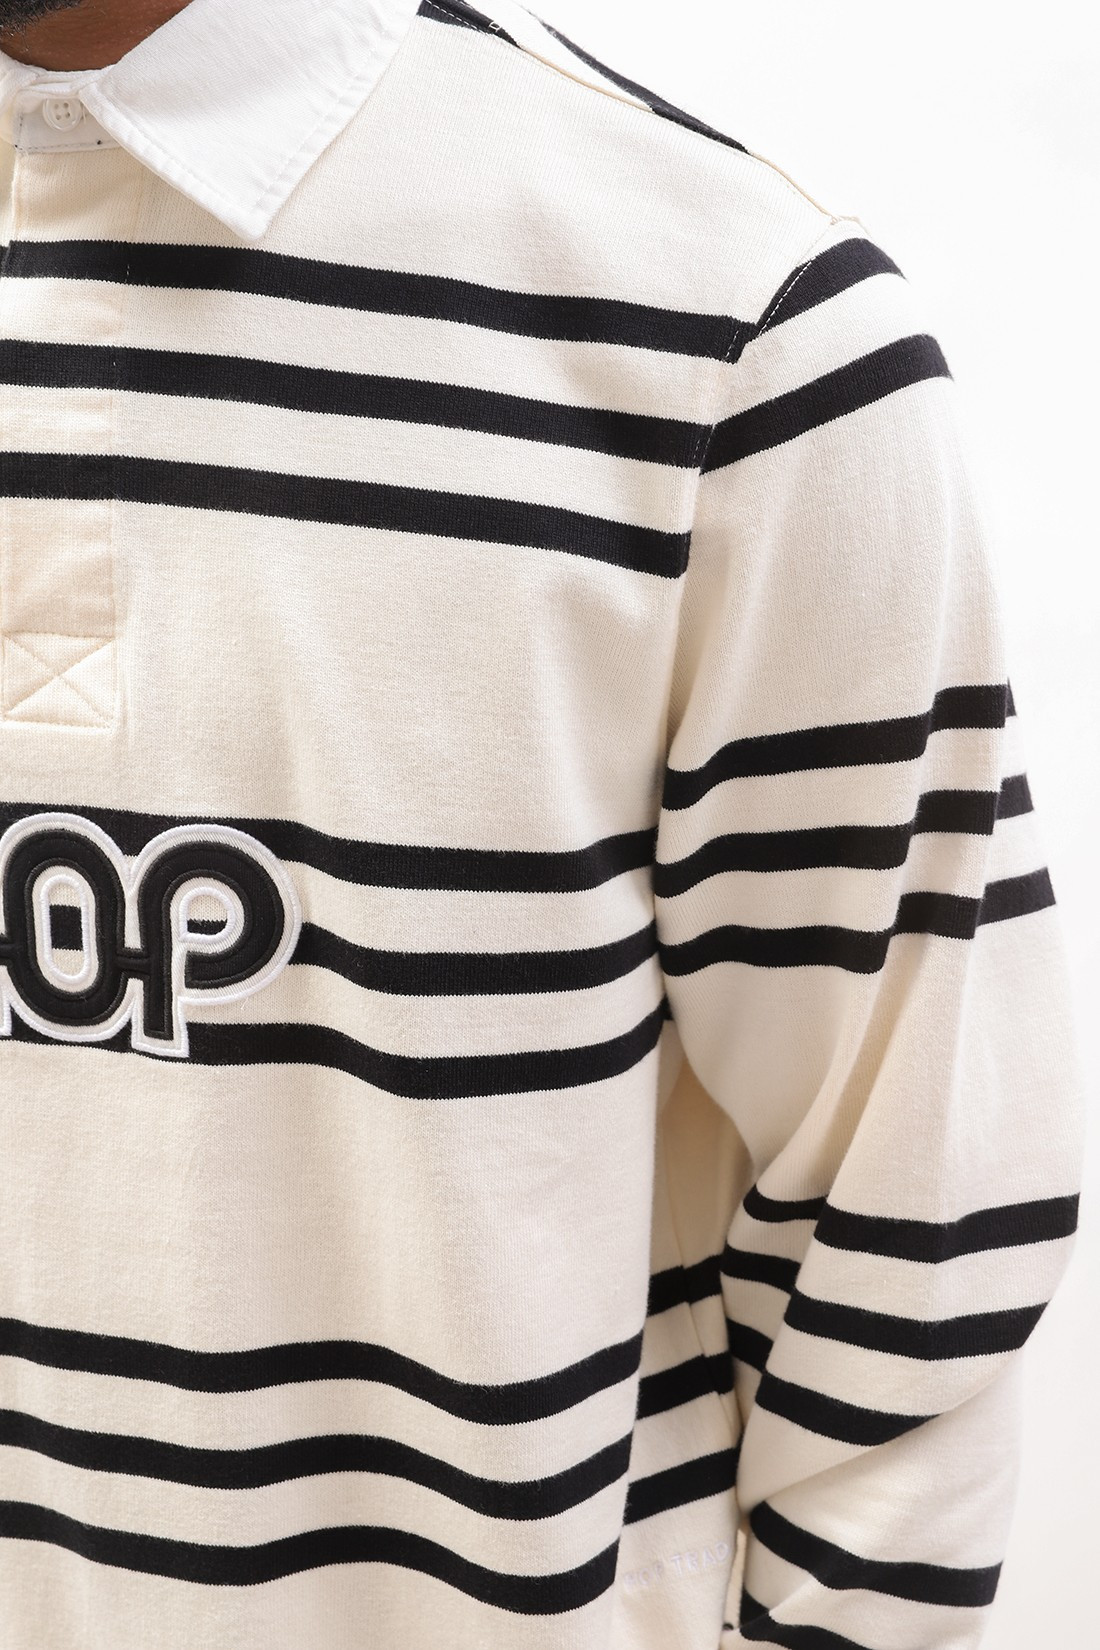 POP TRADING COMPANY / Pub striped rugby polo Black/off white